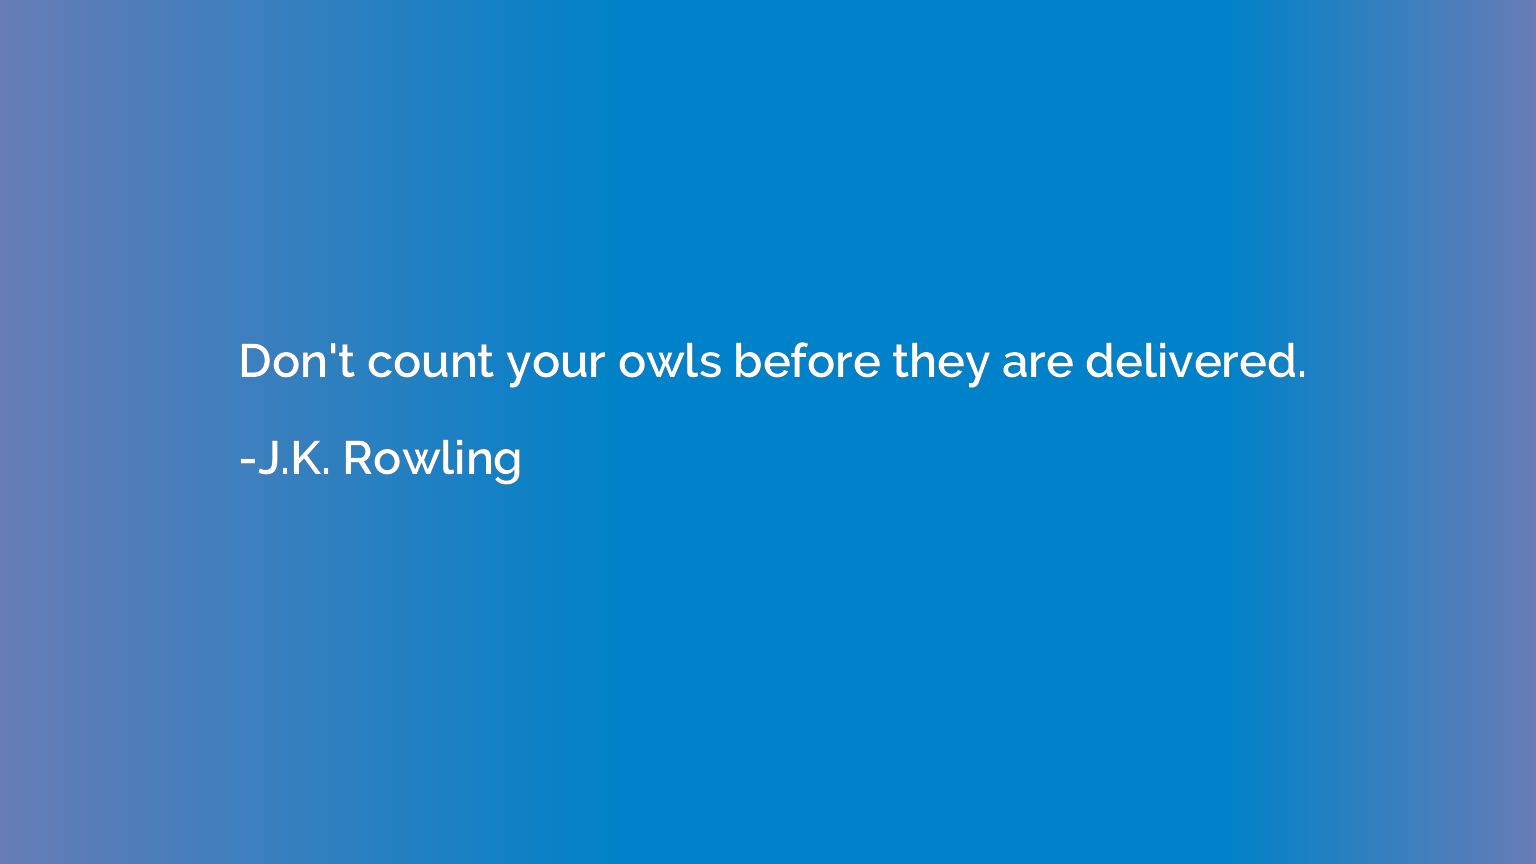 Don't count your owls before they are delivered.